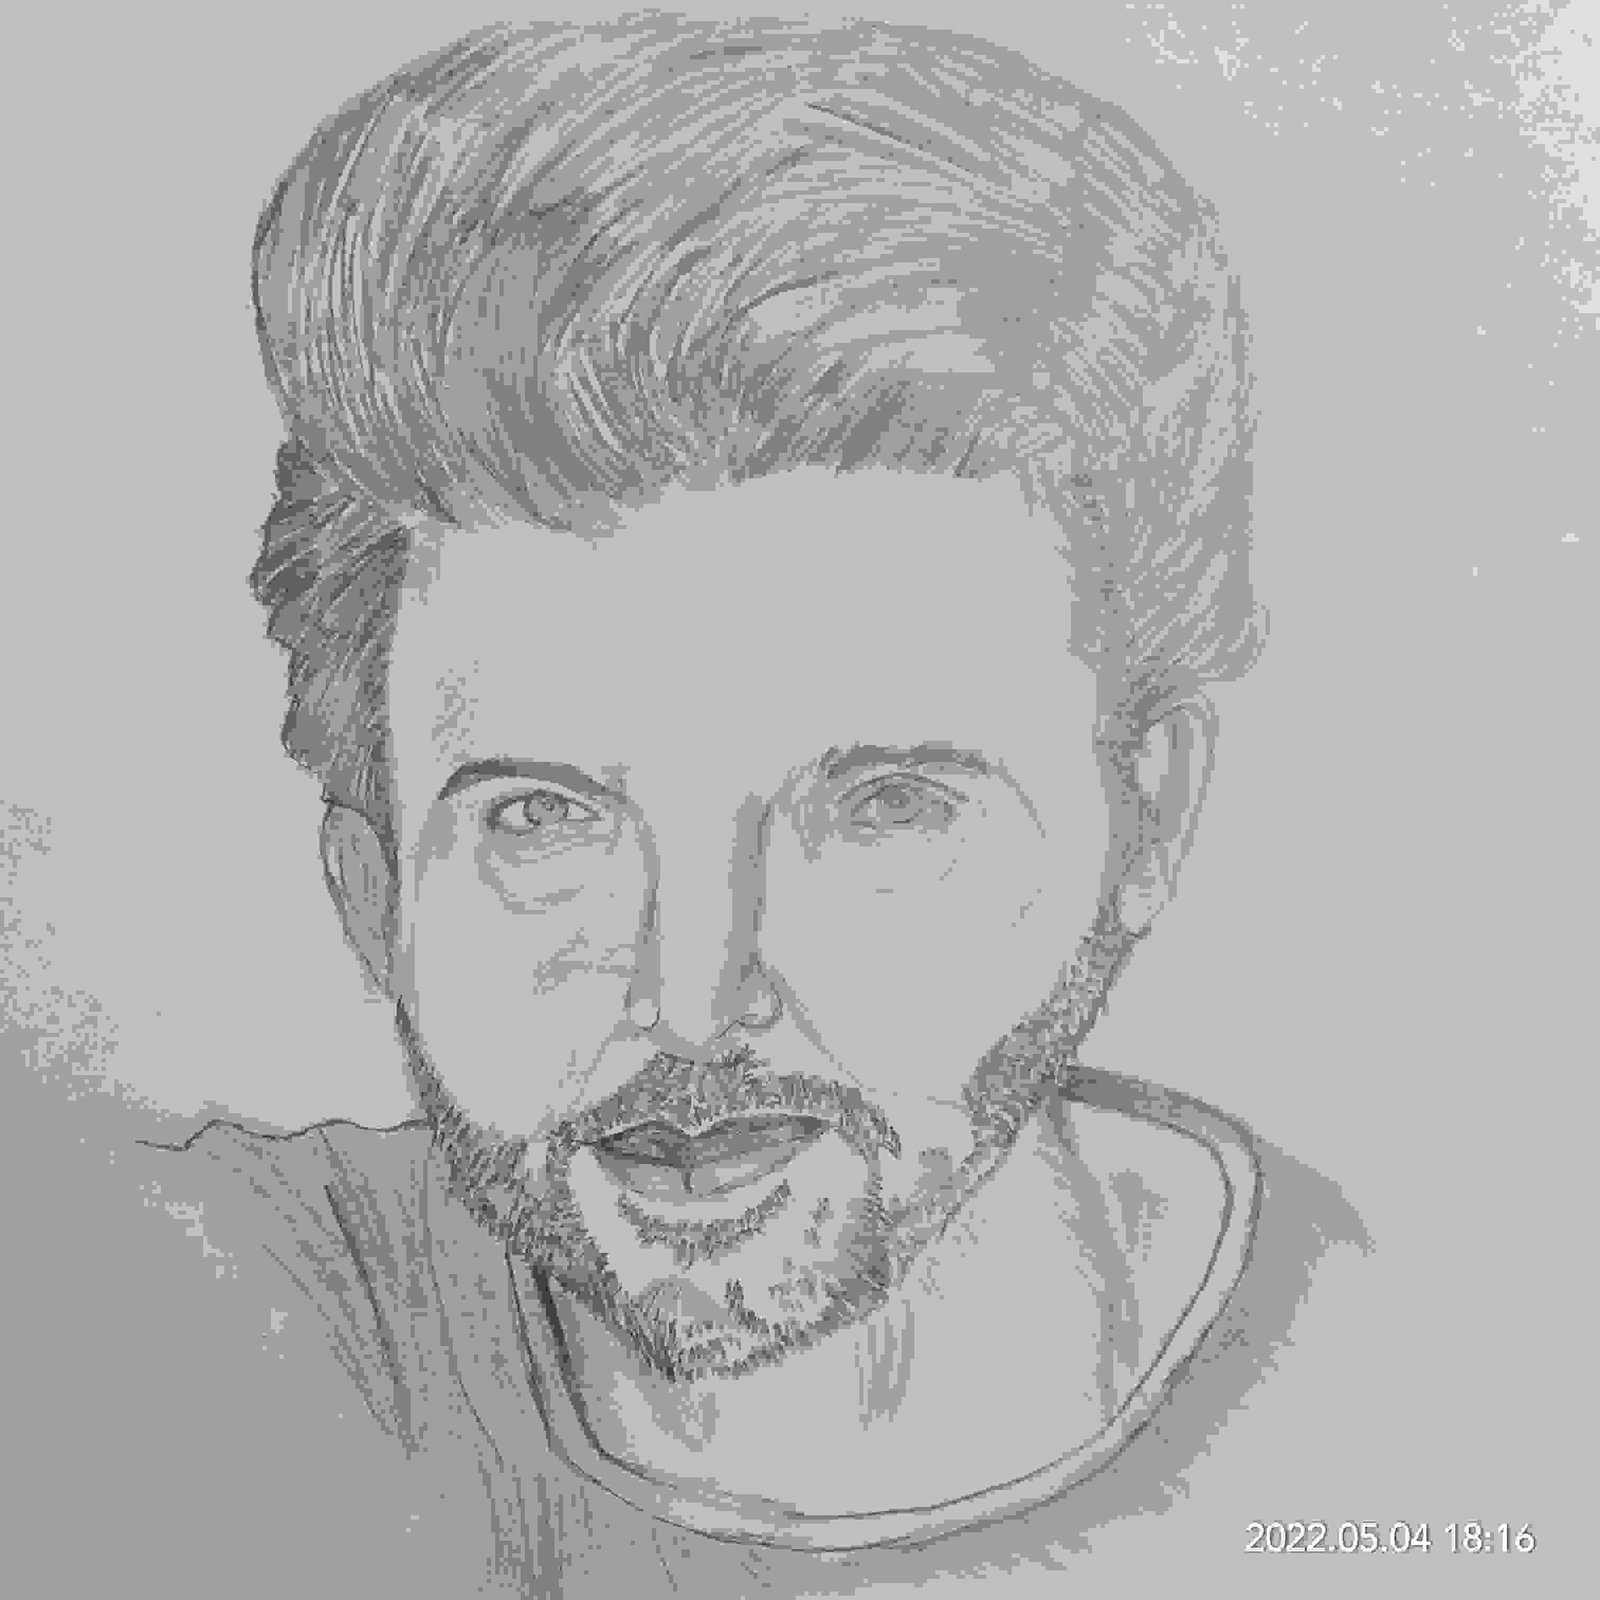 Hrithik Roshan shares an artsy fan tribute dedicated to him; watch the  amazing video here | Hindi Movie News - Times of India